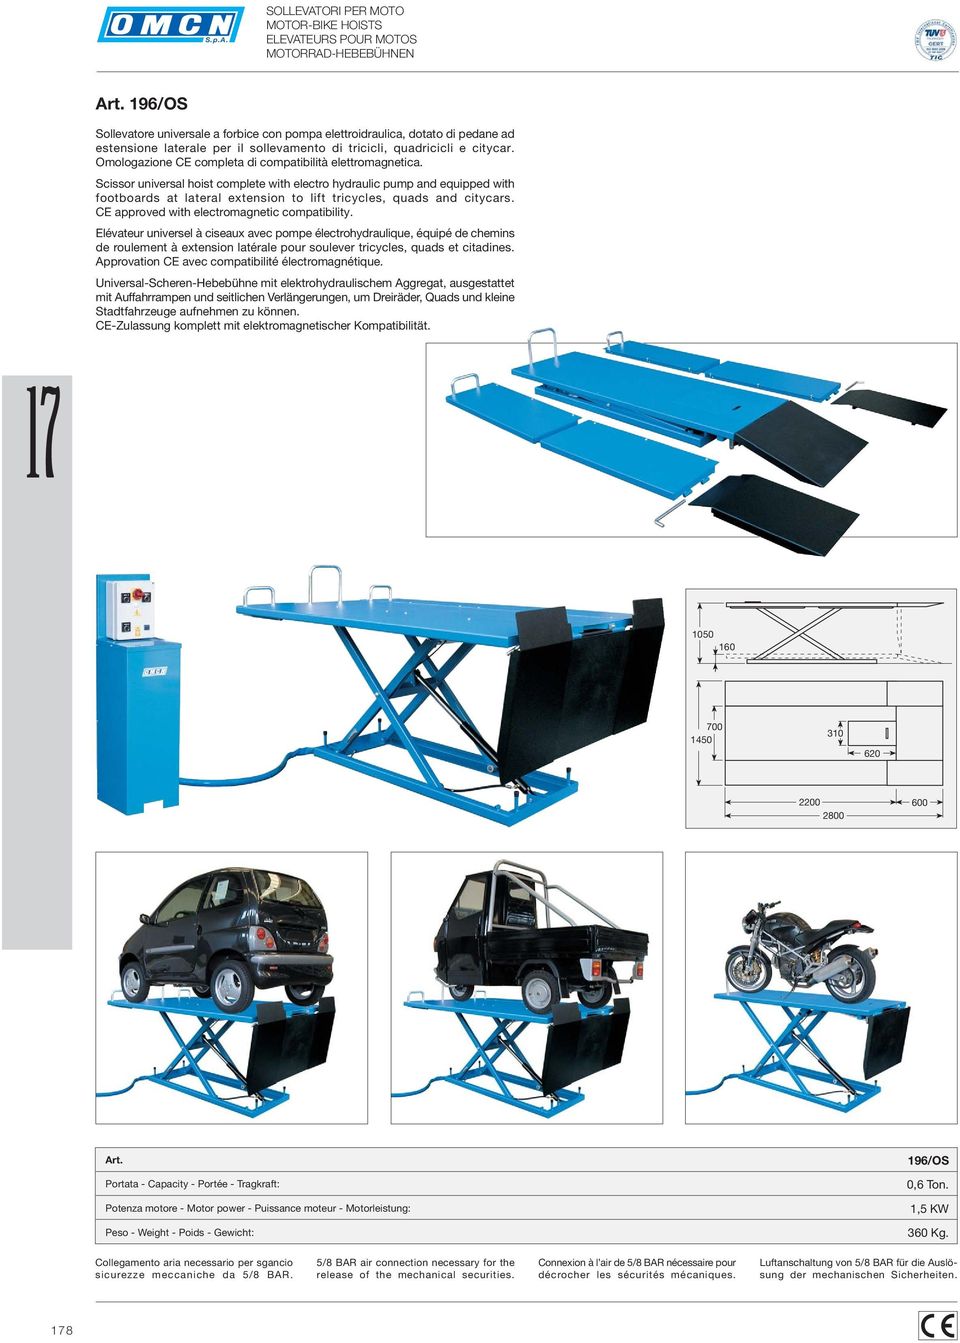 Scissor universal hoist complete with electro hydraulic pump and equipped with footboards at lateral extension to lift tricycles, quads and citycars. CE approved with electromagnetic compatibility.